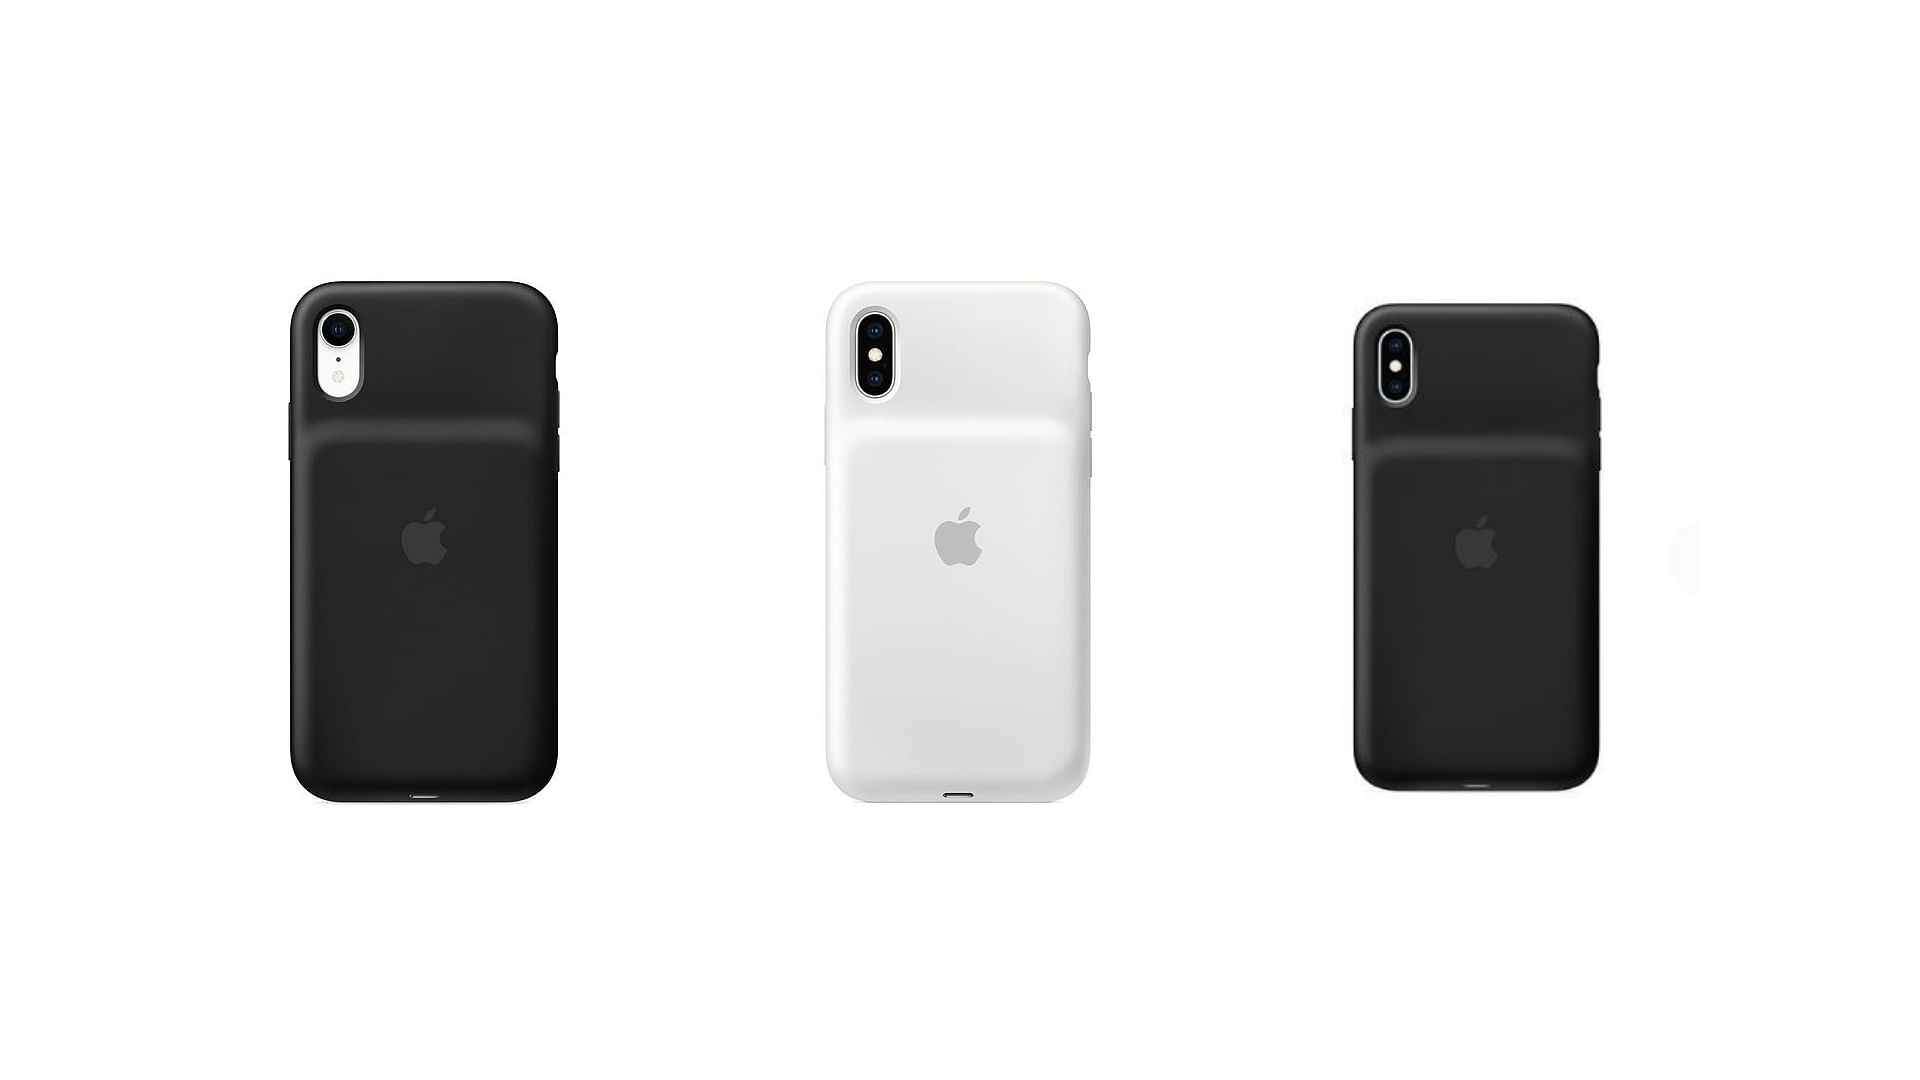 The smart battery cases will cost $129 for all three iPhone models.